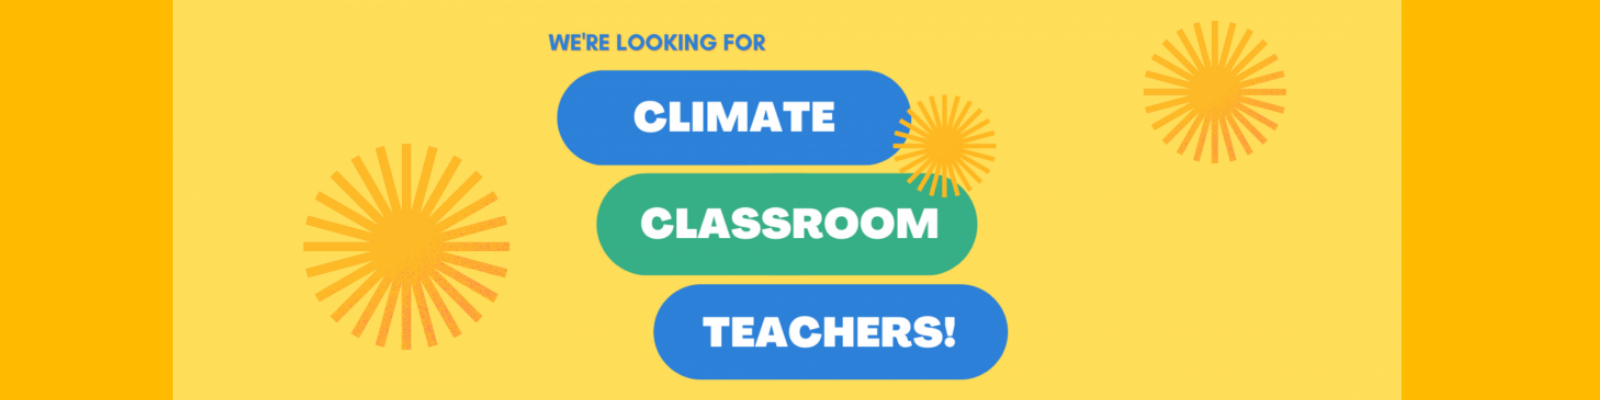 Climate Classroom Teachers ad in bright yellow and orange